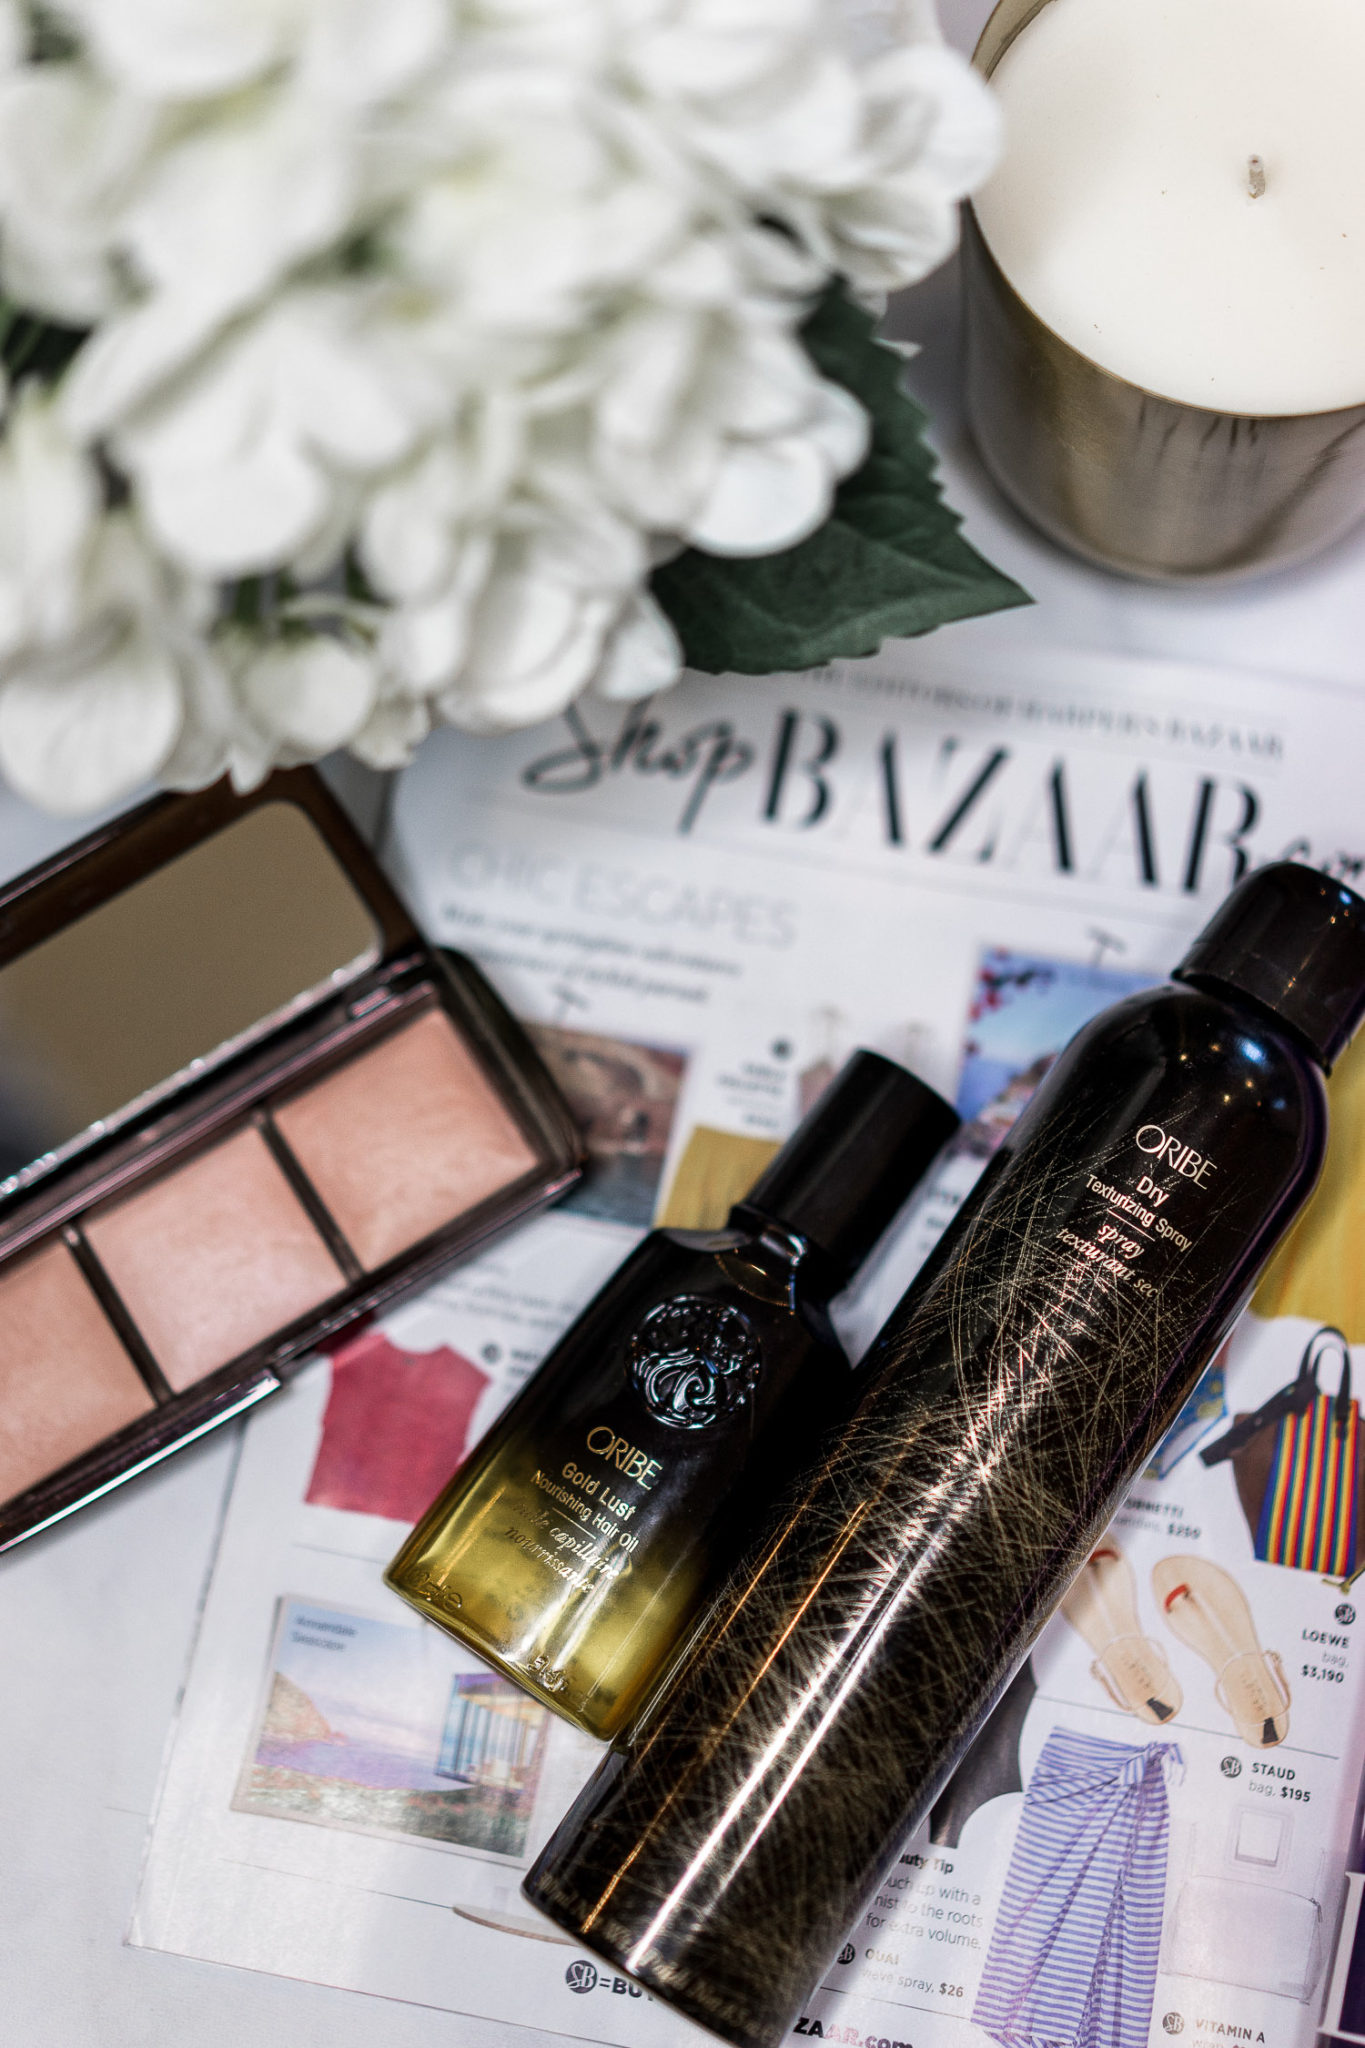 Best Hair Care Products - Oribe Dry Texturizing Spray and Cote de Azur Hair Oil